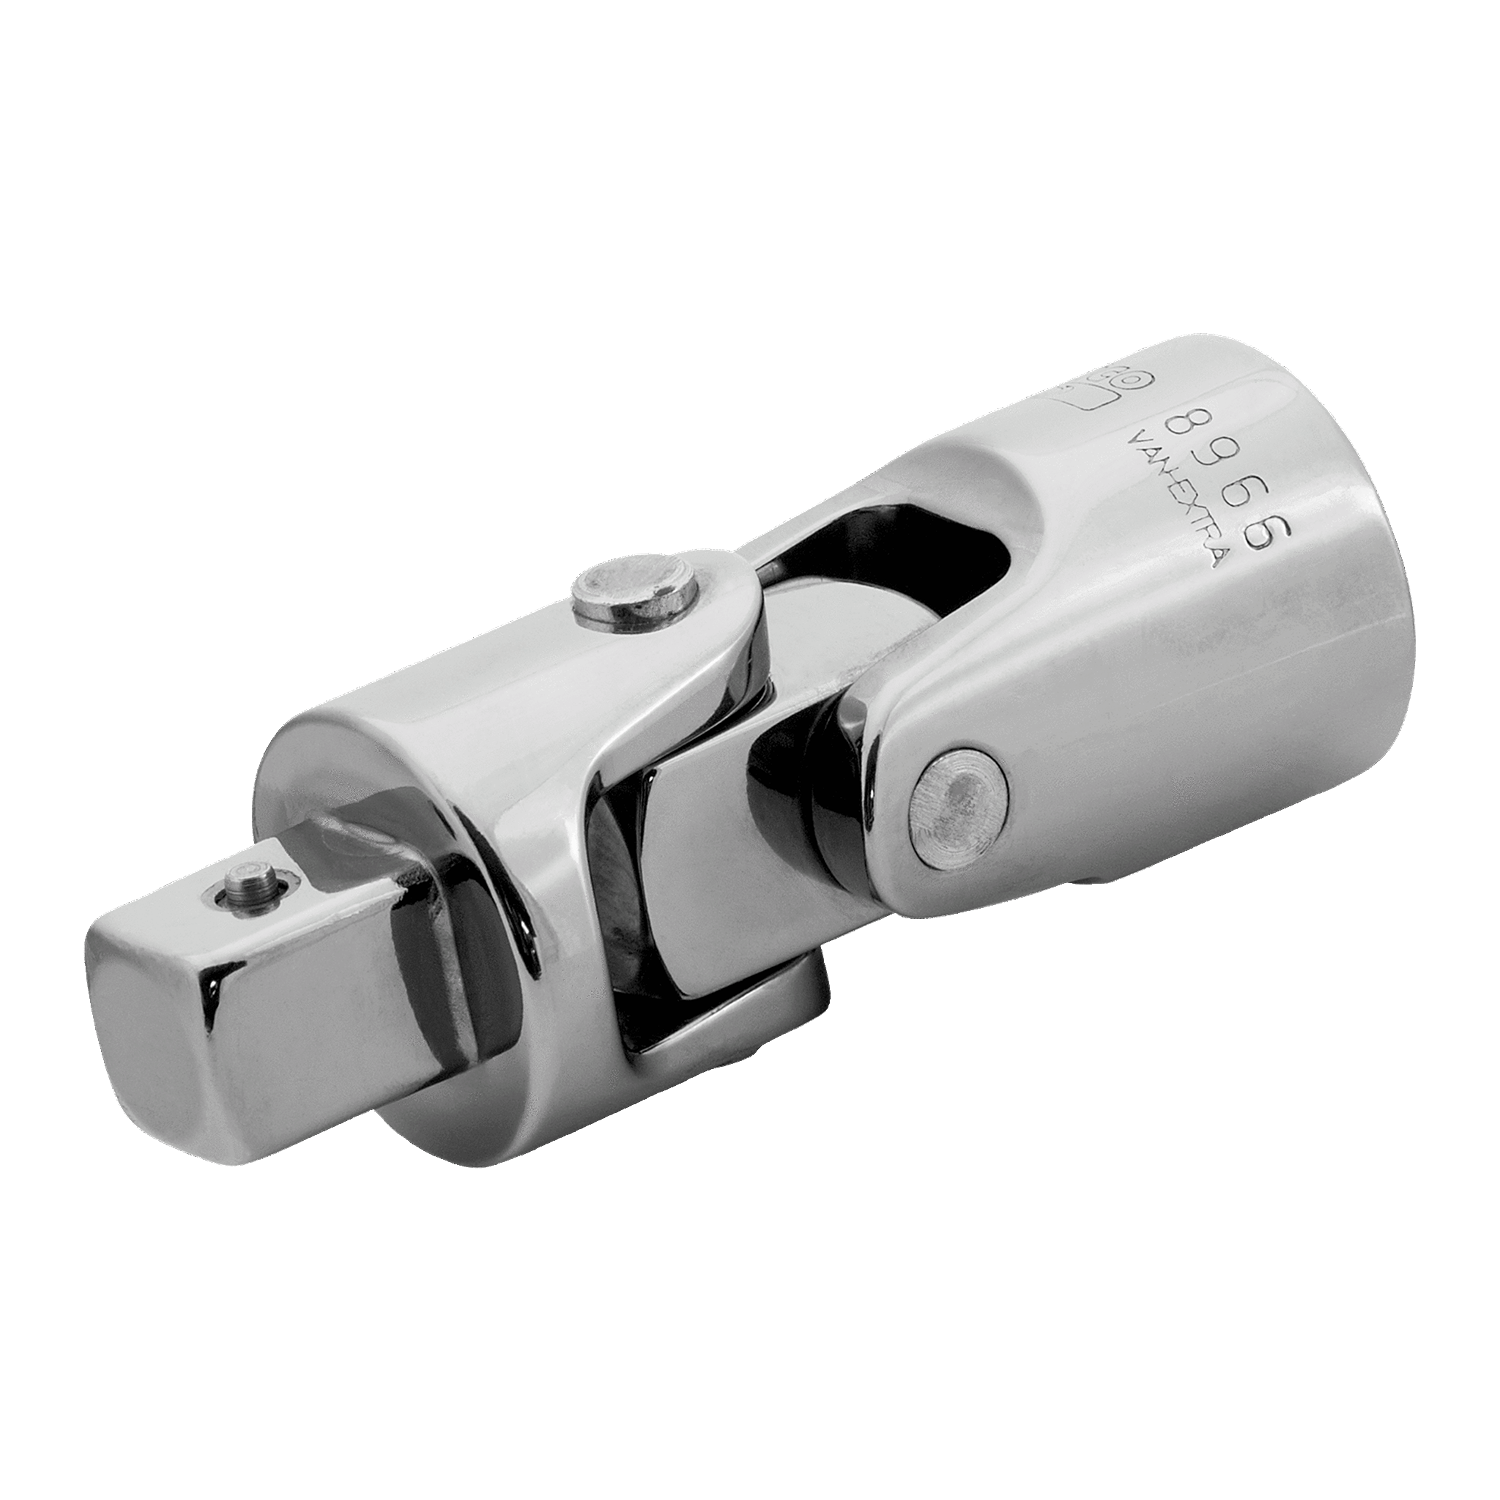 BAHCO 8966 3/4" Square Drive Universal Joint (BAHCO Tools) - Premium Universal Joint from BAHCO - Shop now at Yew Aik.